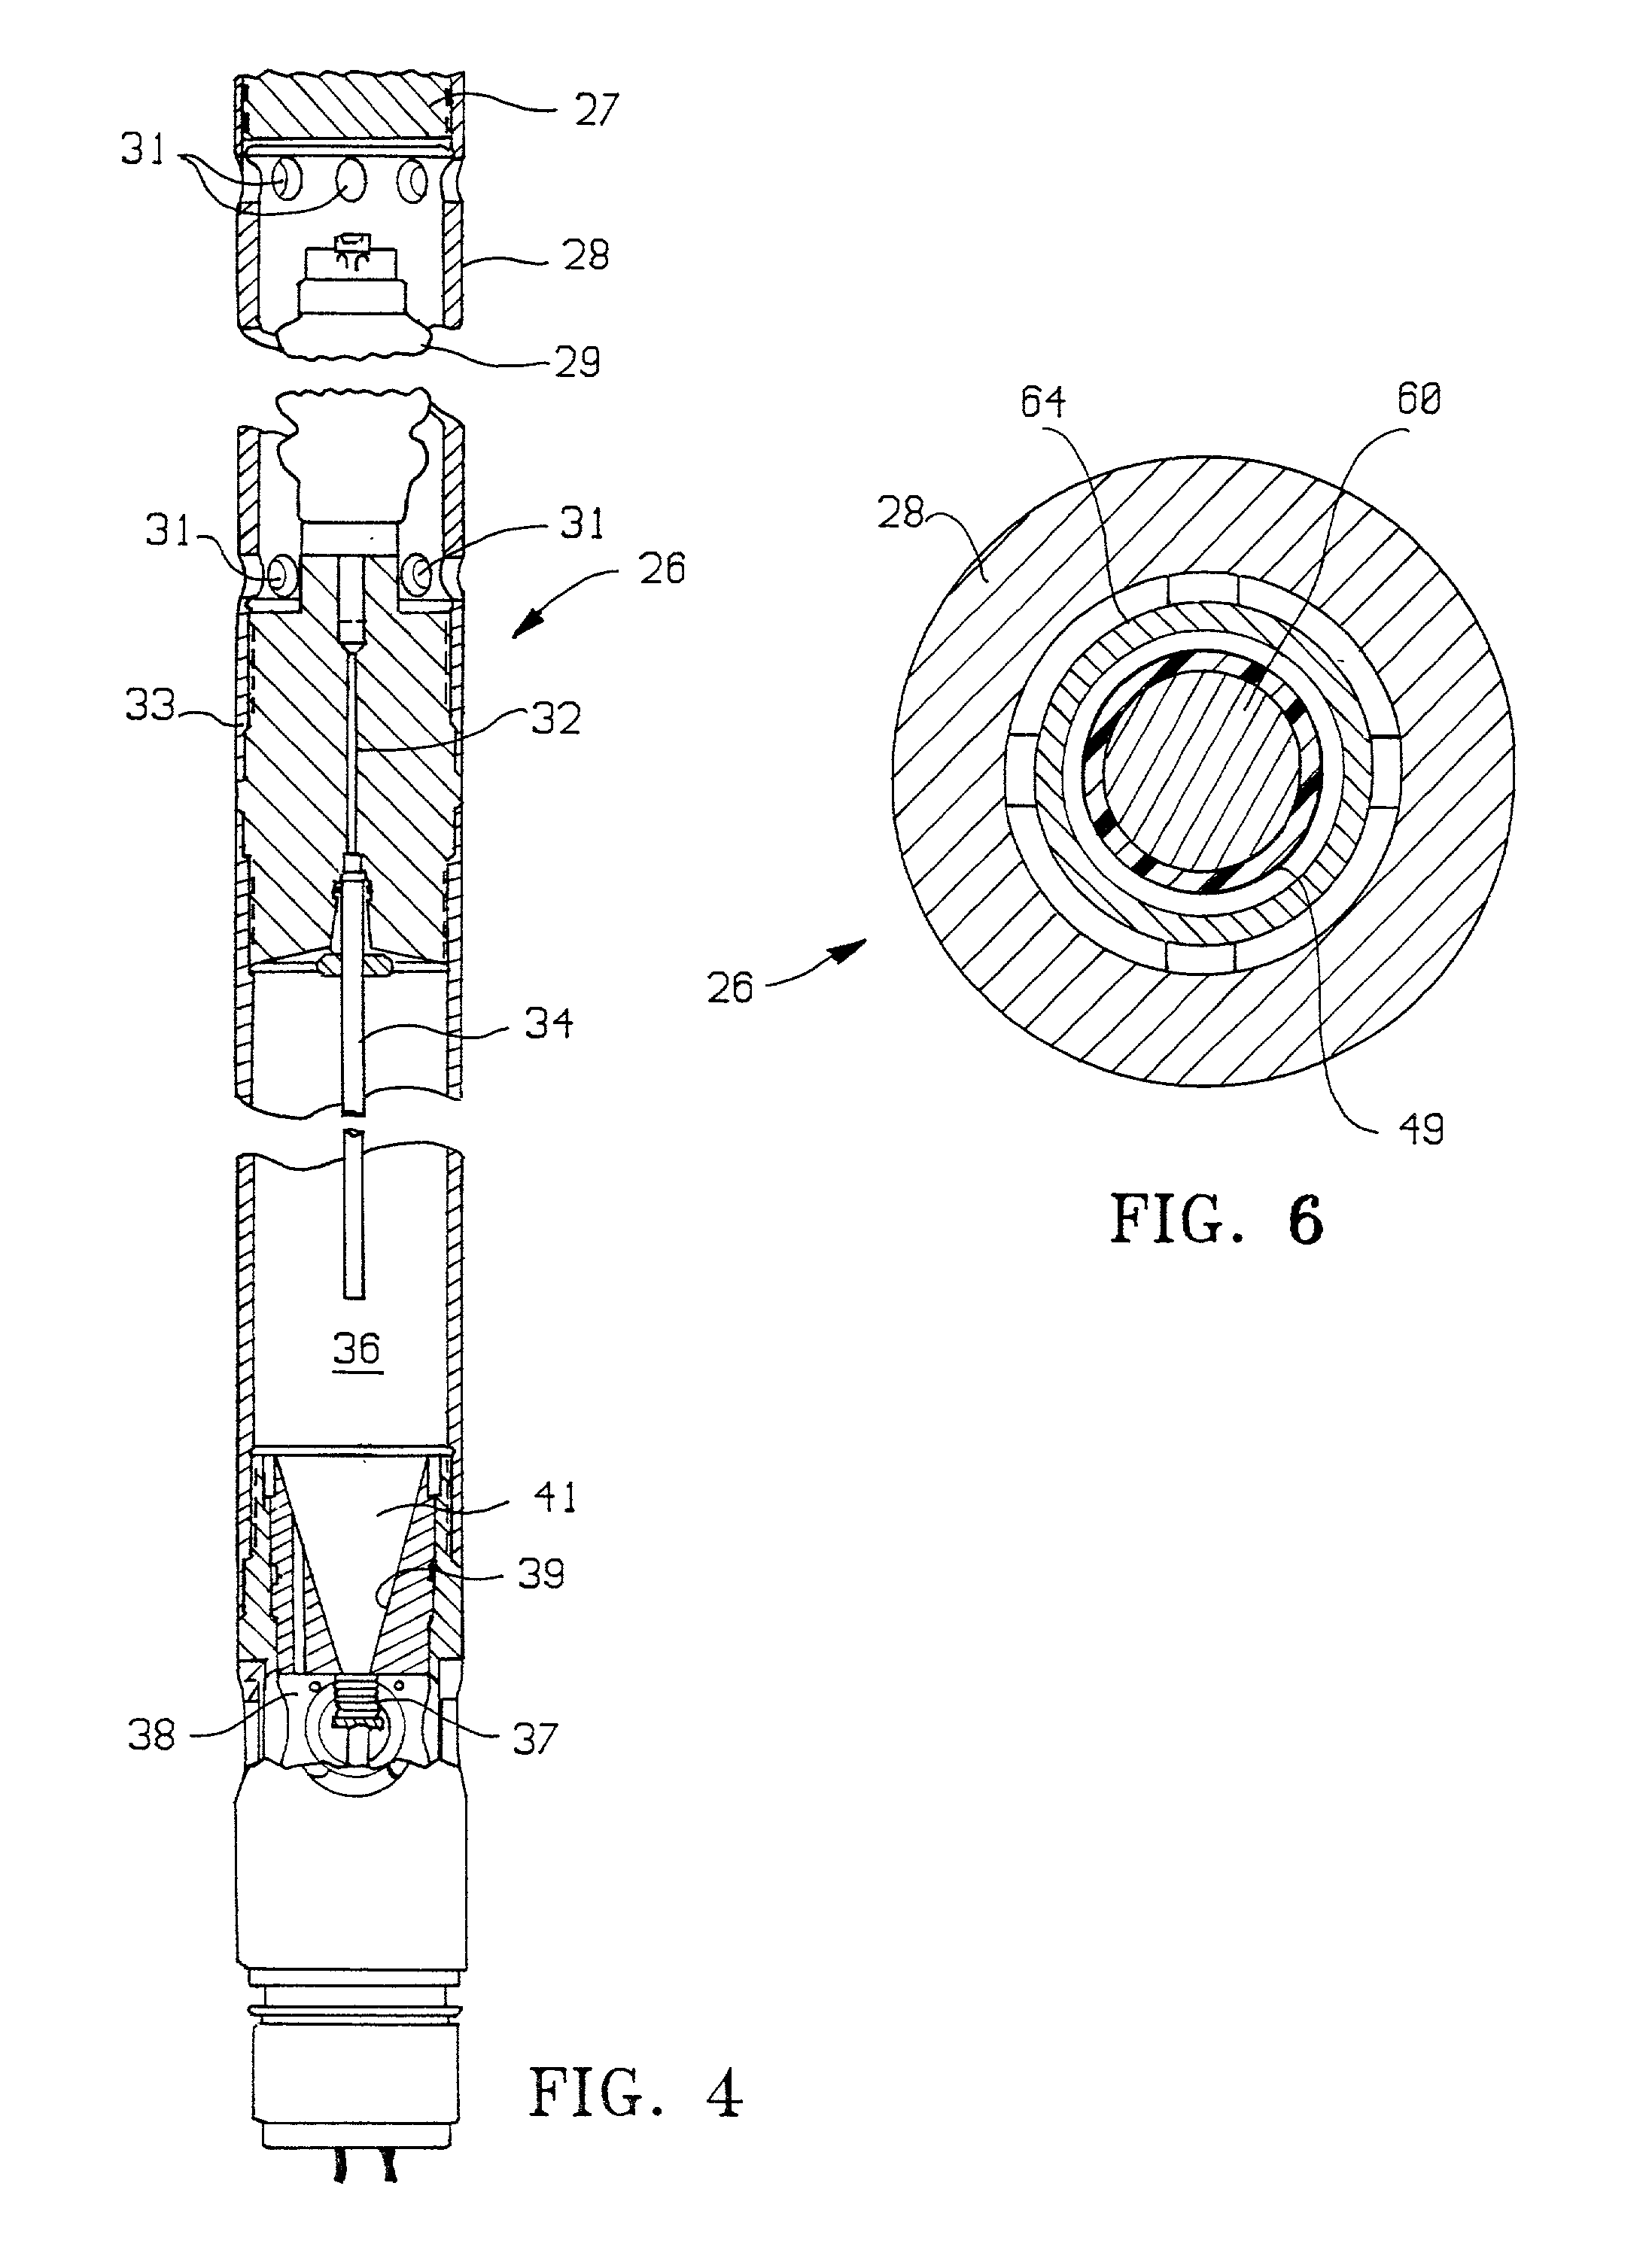 Method and apparatus for improved communication in a wellbore utilizing acoustic signals